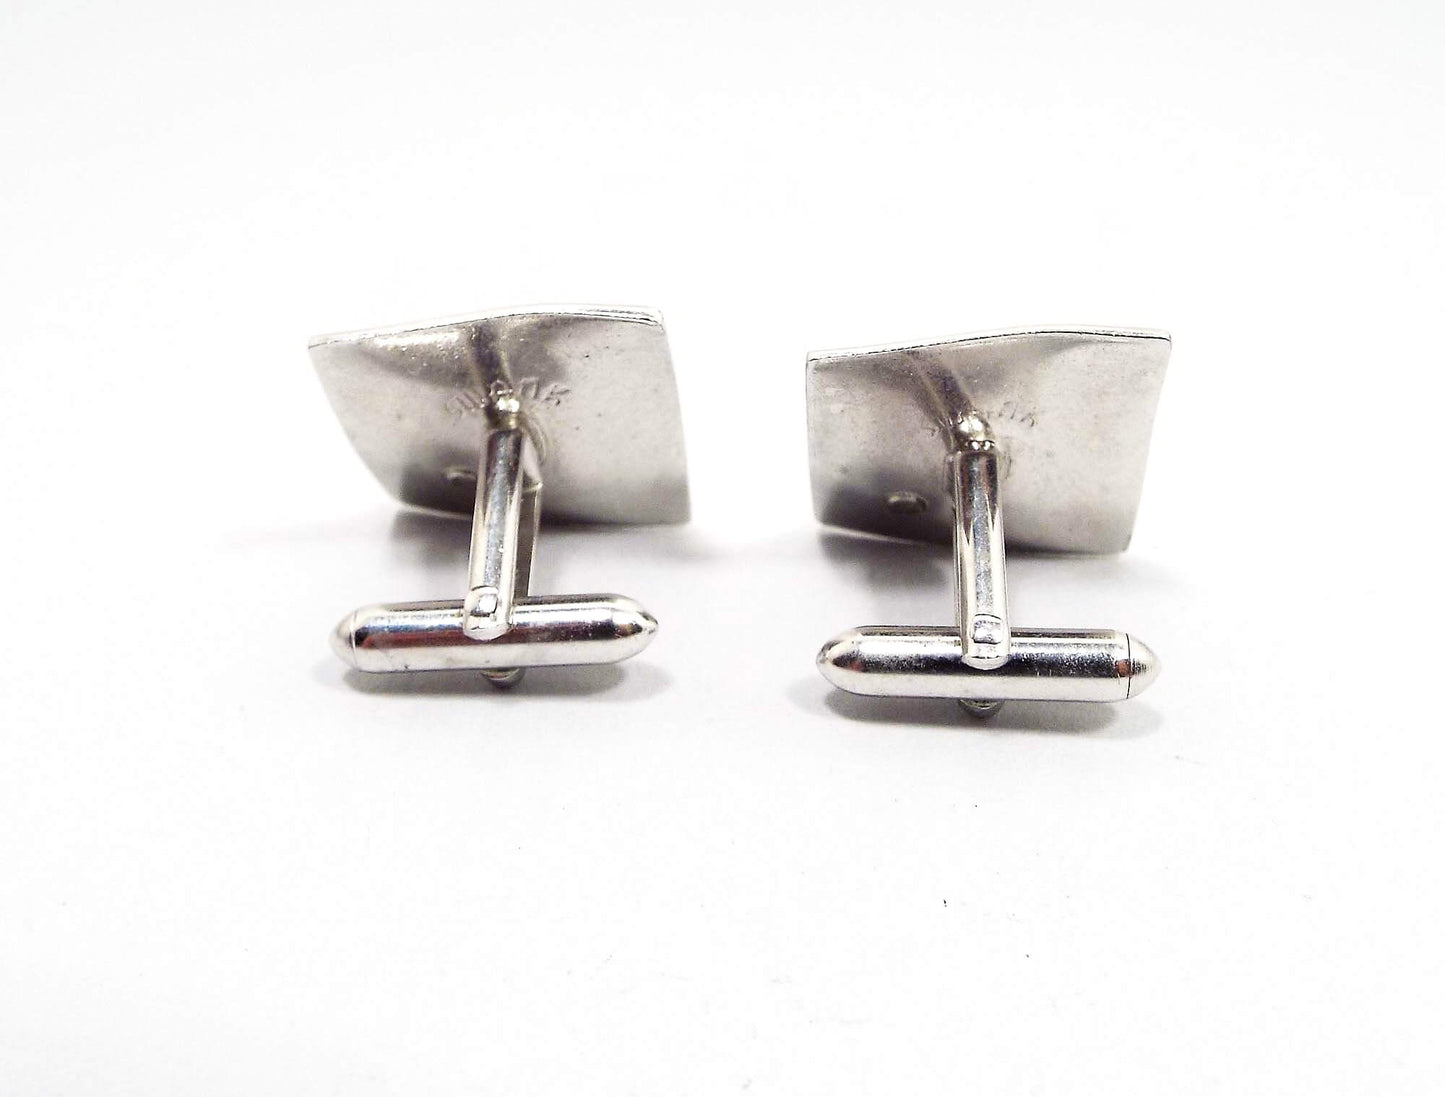 Swank Silver Tone and Black Glass Vintage Cufflinks, Square Cuff Links